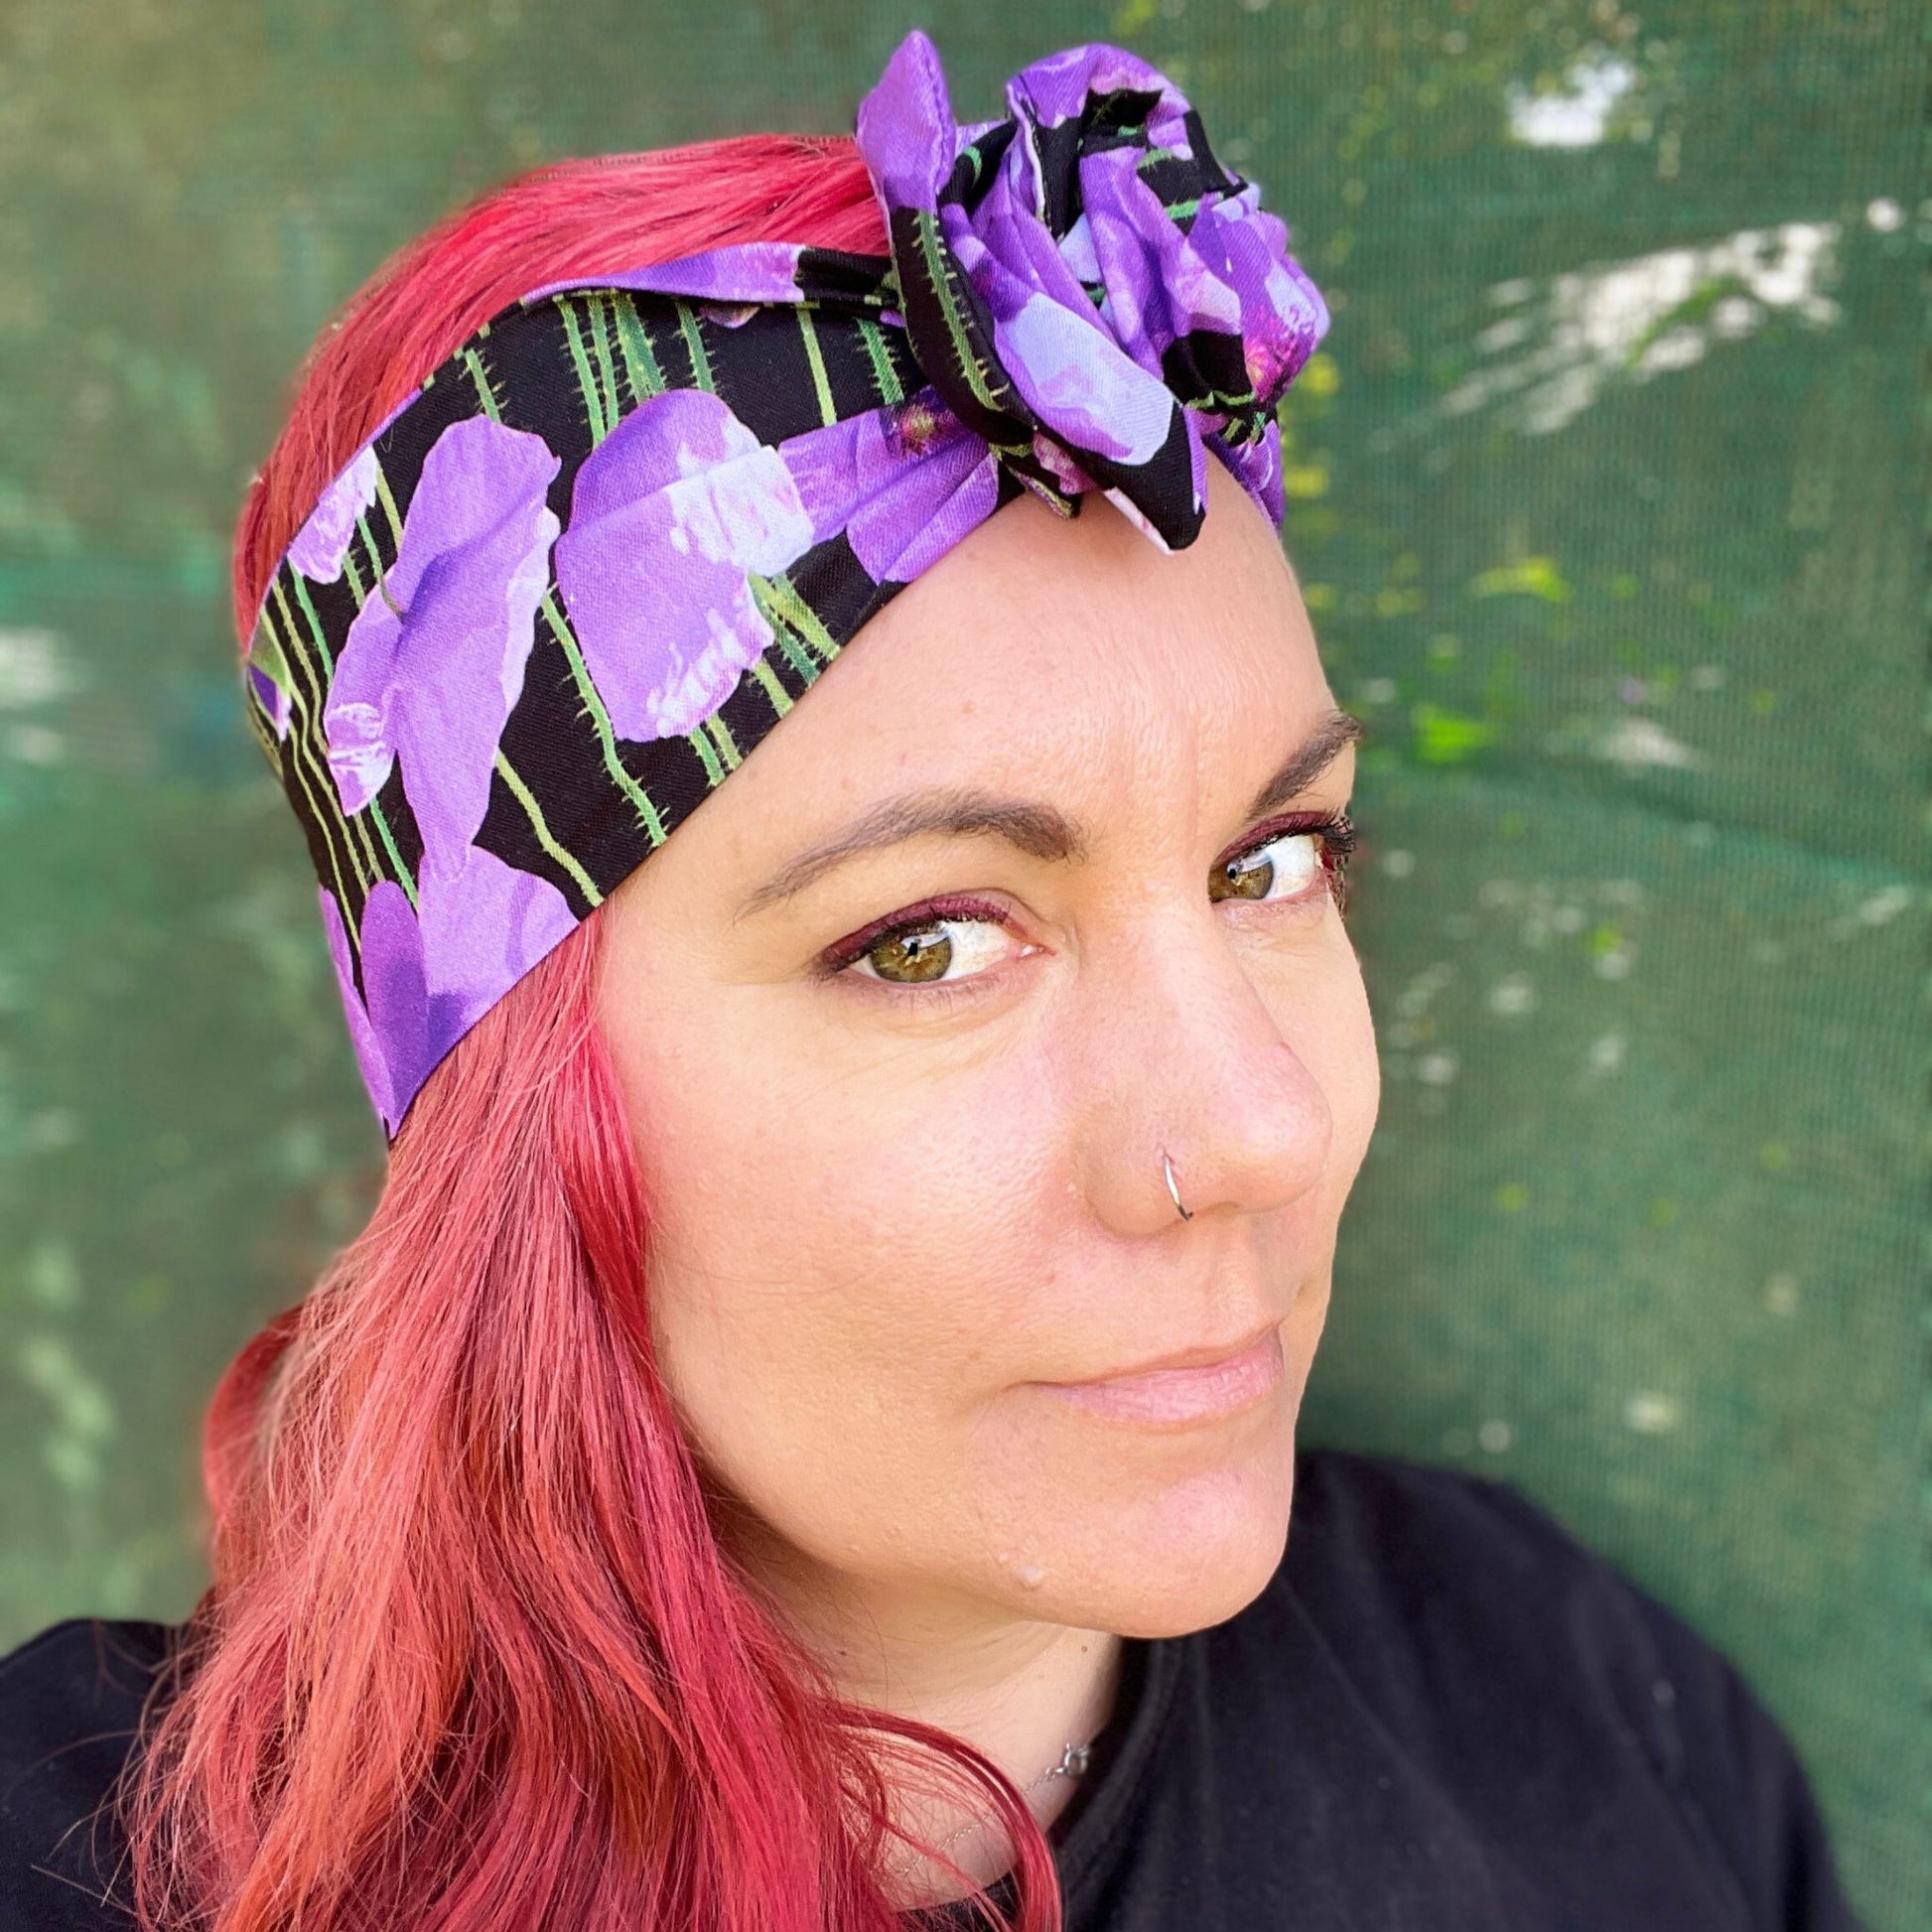 showcasing a wire headwrap adorned with bold purple poppies against a black background. The headwrap is tied in a charming knot atop her head, lending a playful and stylish look. The vivid purple of the flowers stands out